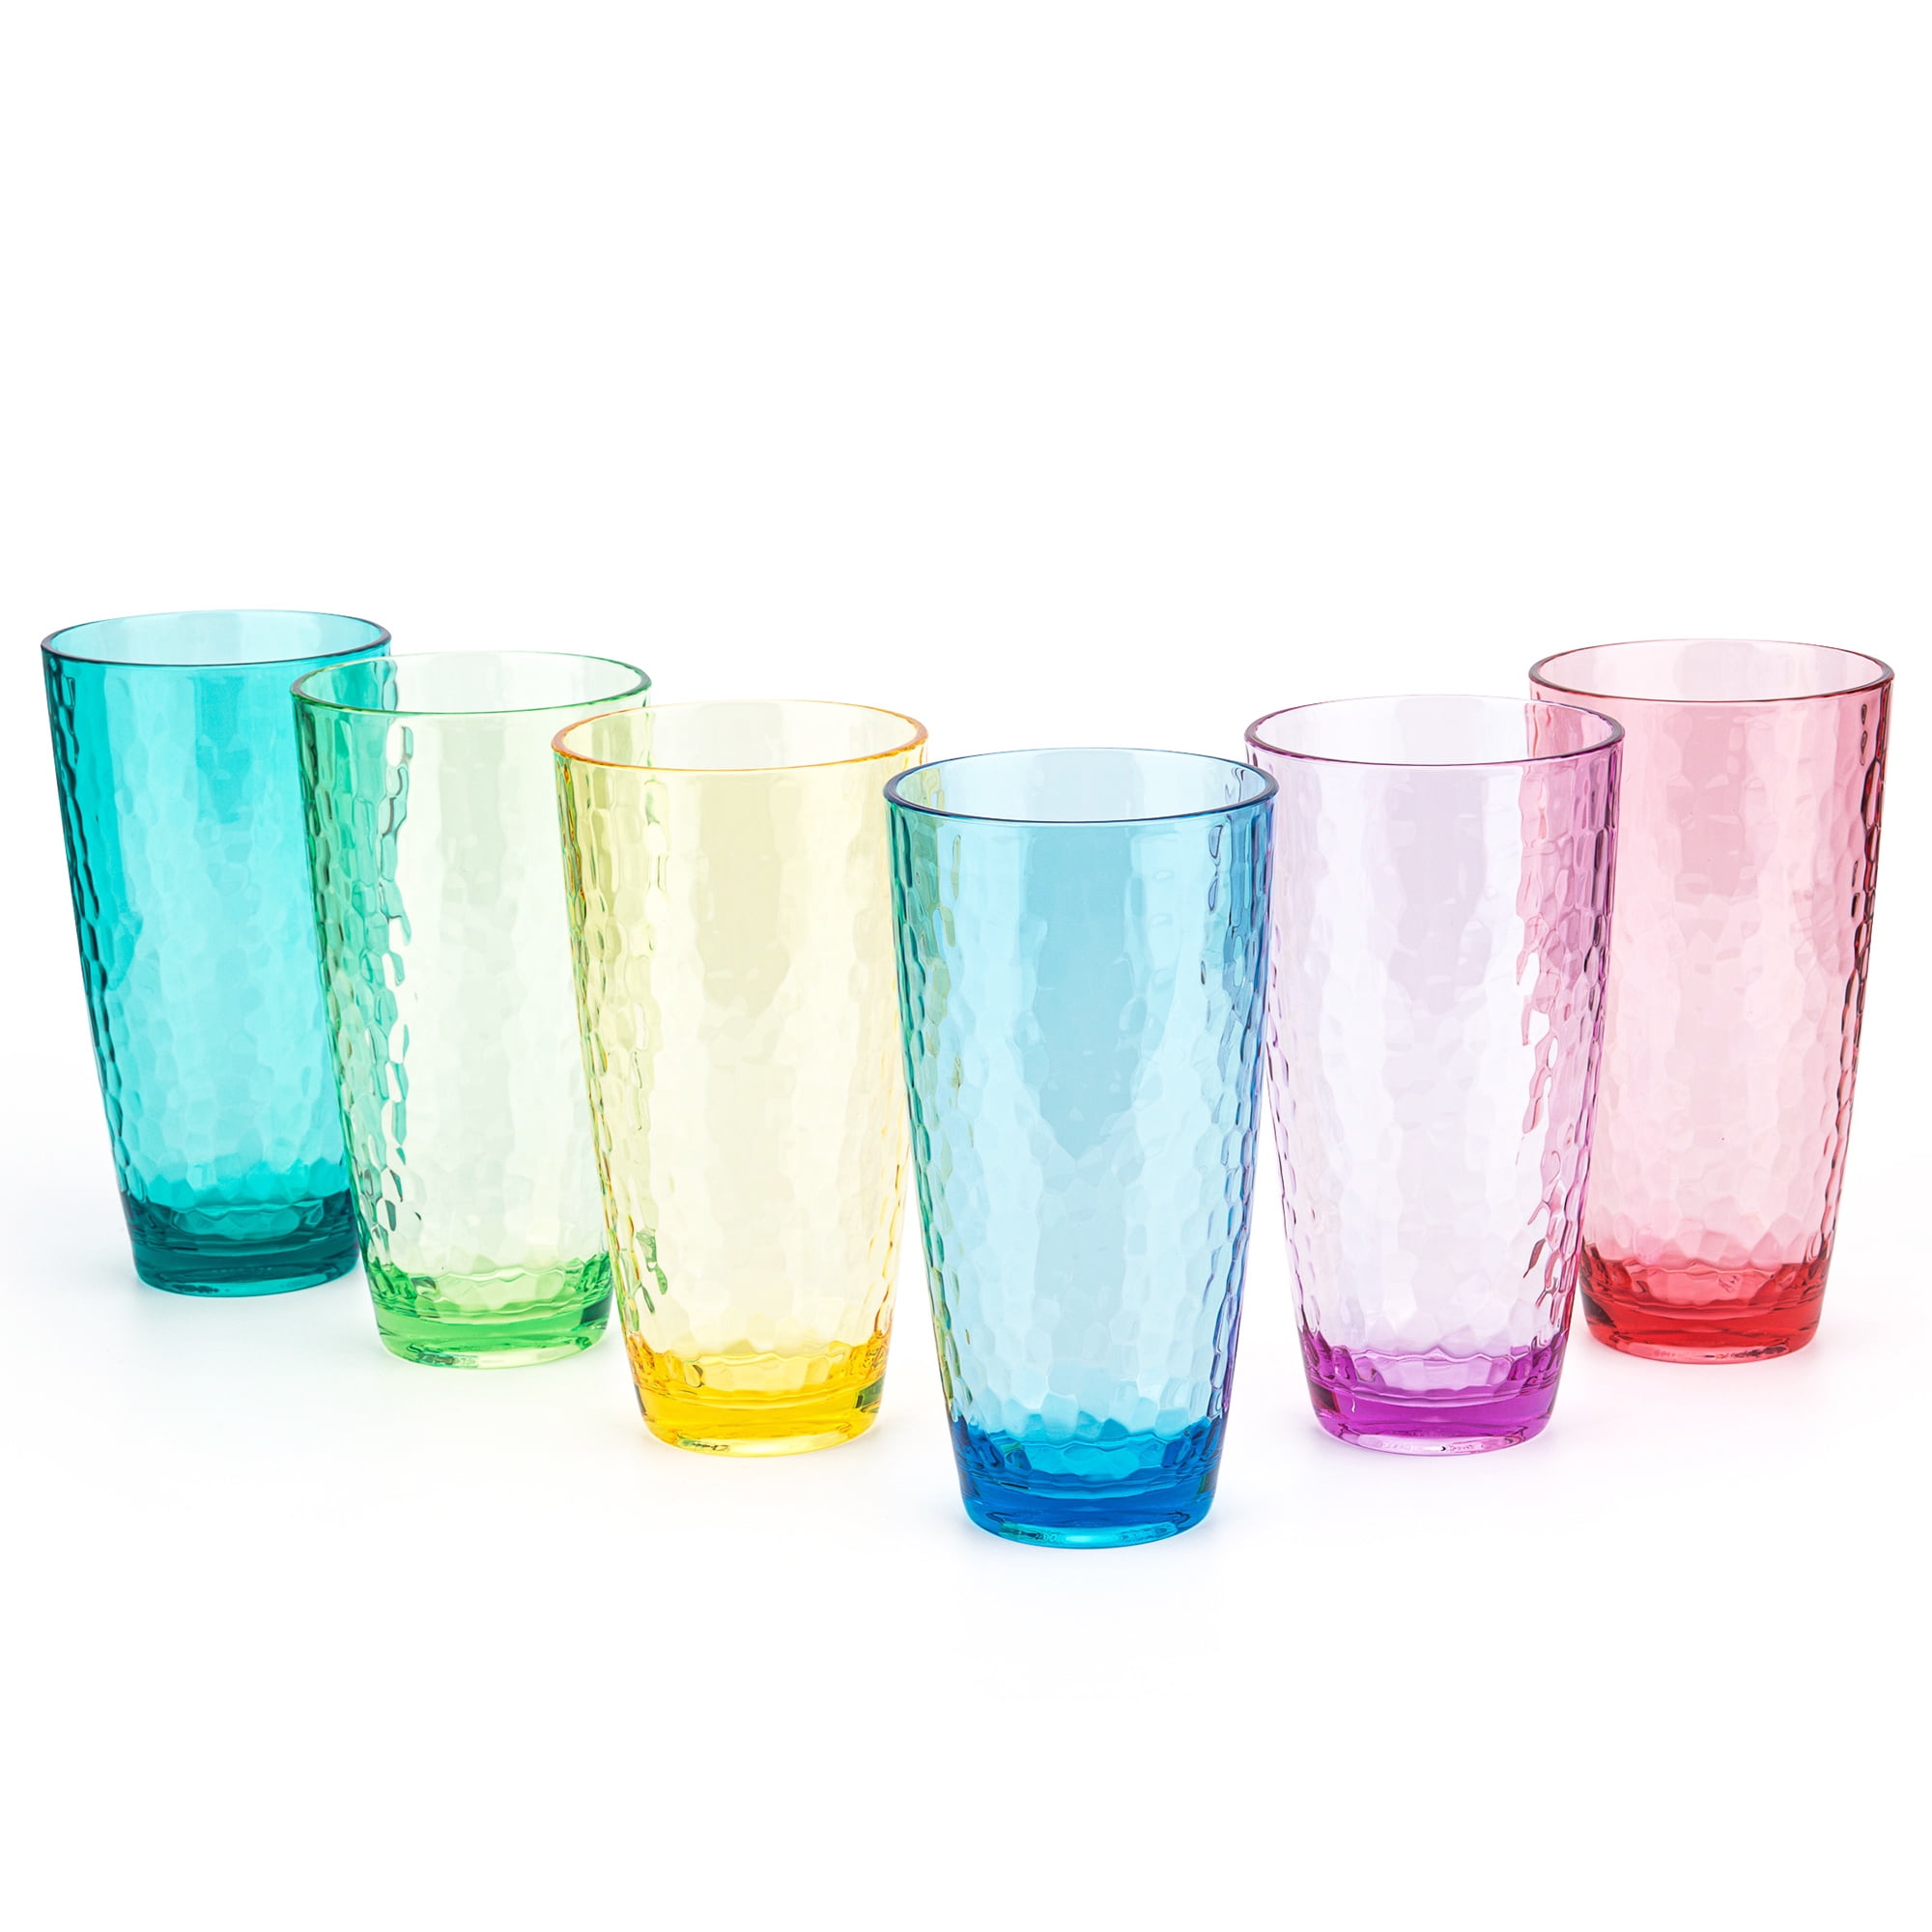 KX-WARE 32-ounce Plastic Tumblers Large Drinking Glasses, Set of 12  Multicolor - Unbreakable, Dishwasher Safe, BPA Free